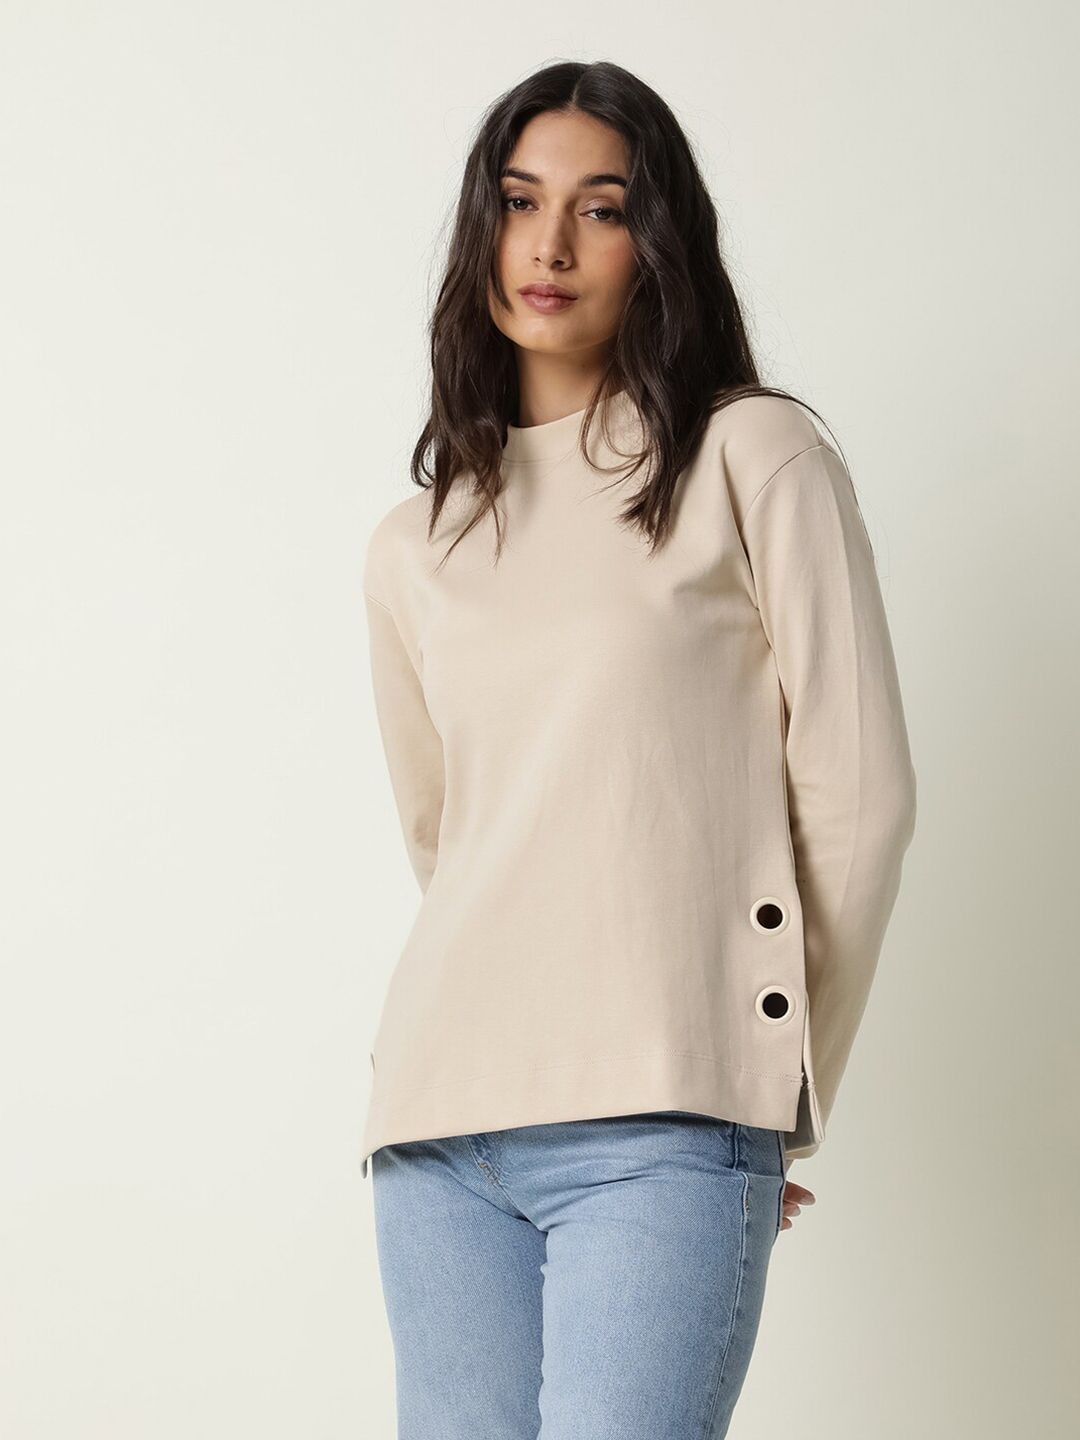 RAREISM Beige High Neck Long Sleeves Top Price in India